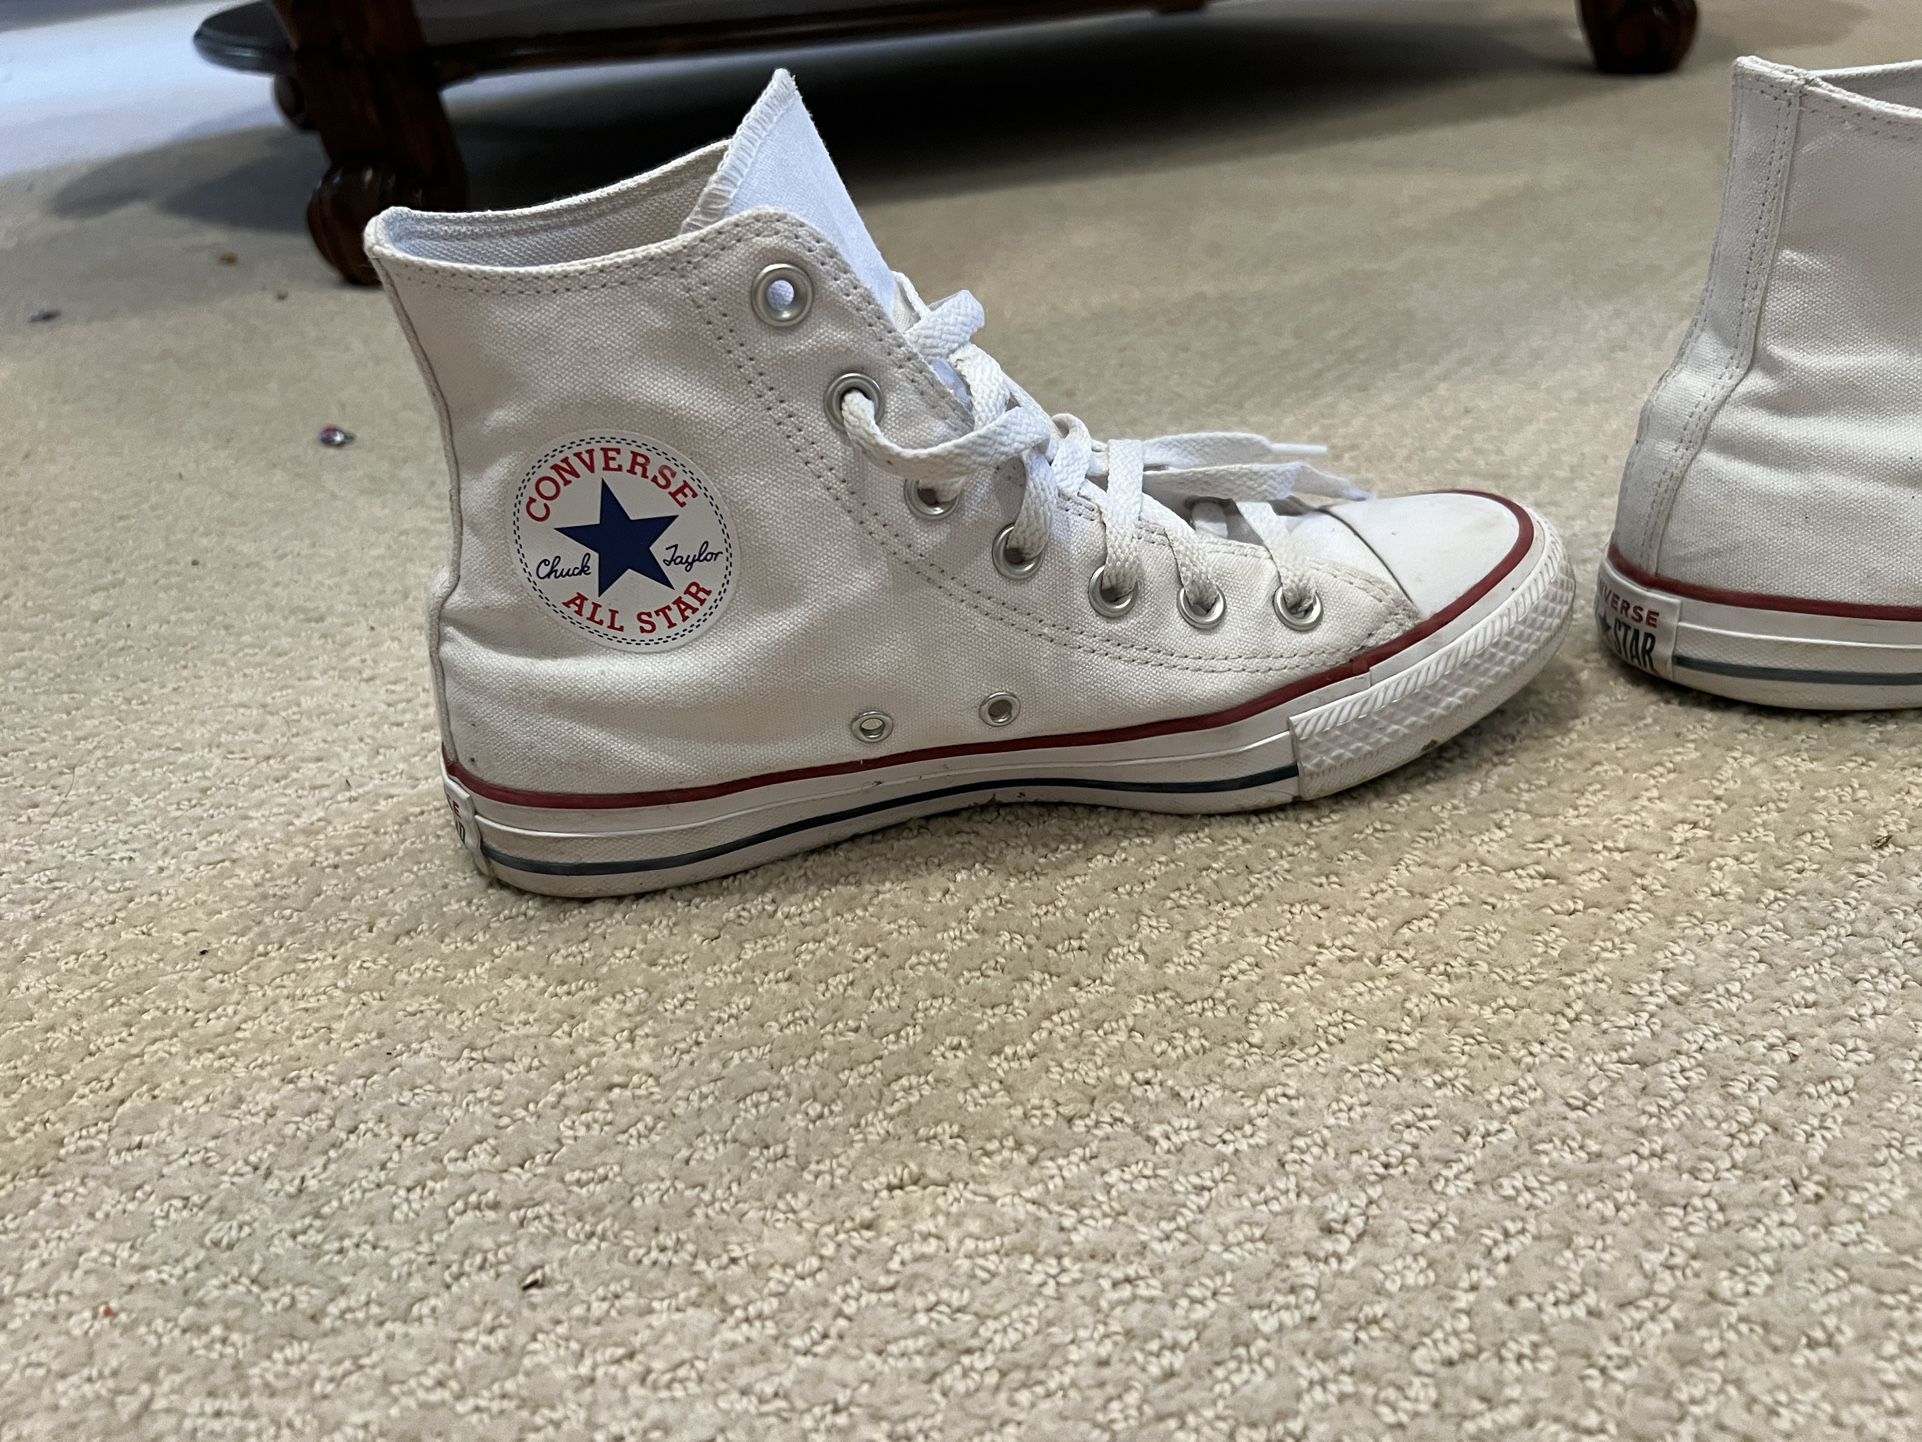 Converse All Star Chick Taylor High Top Sneakers 